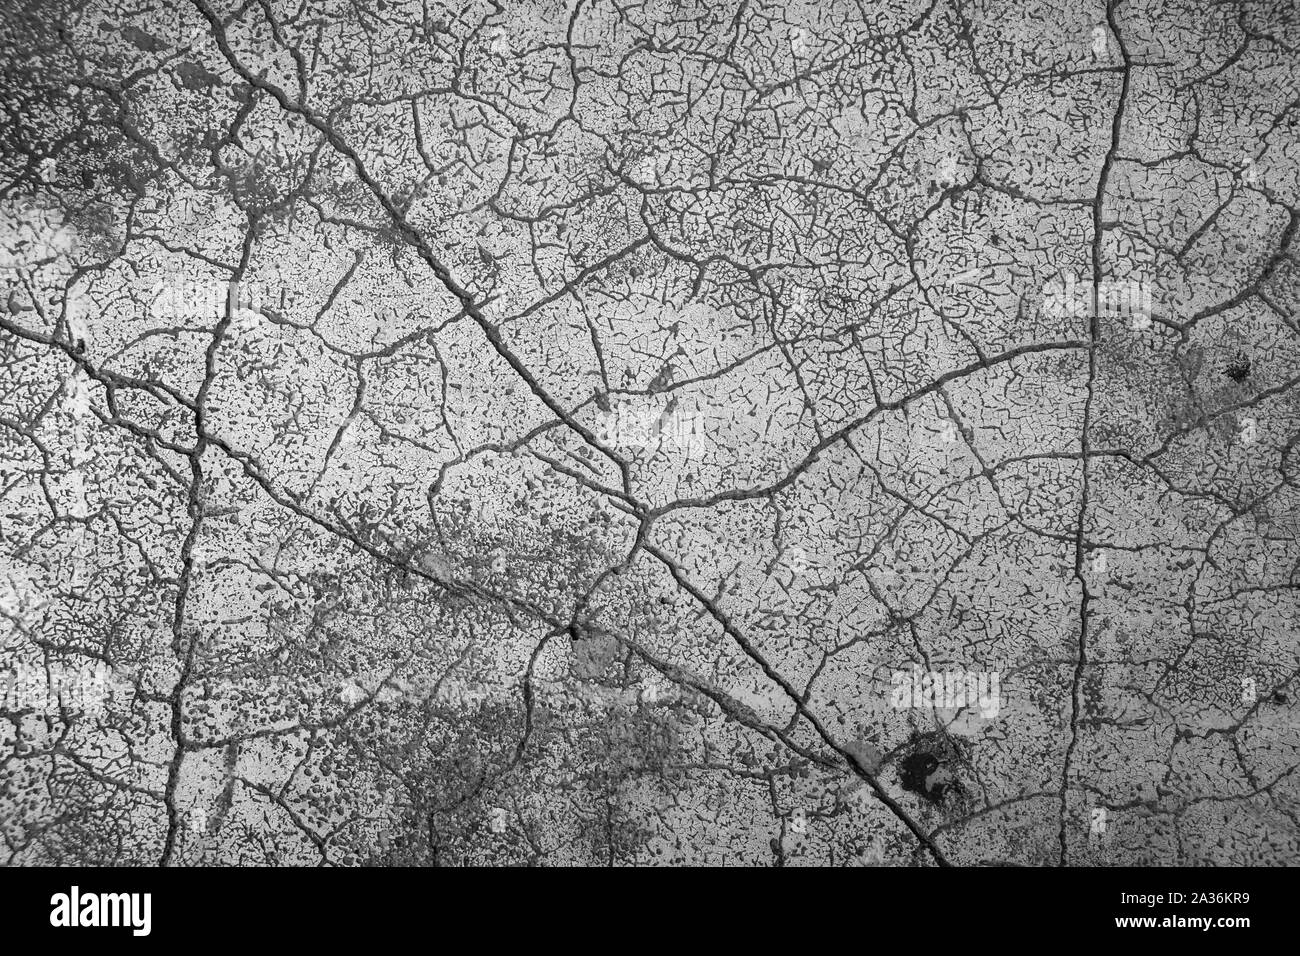 cracked texture of concrete outdoor table Stock Photo